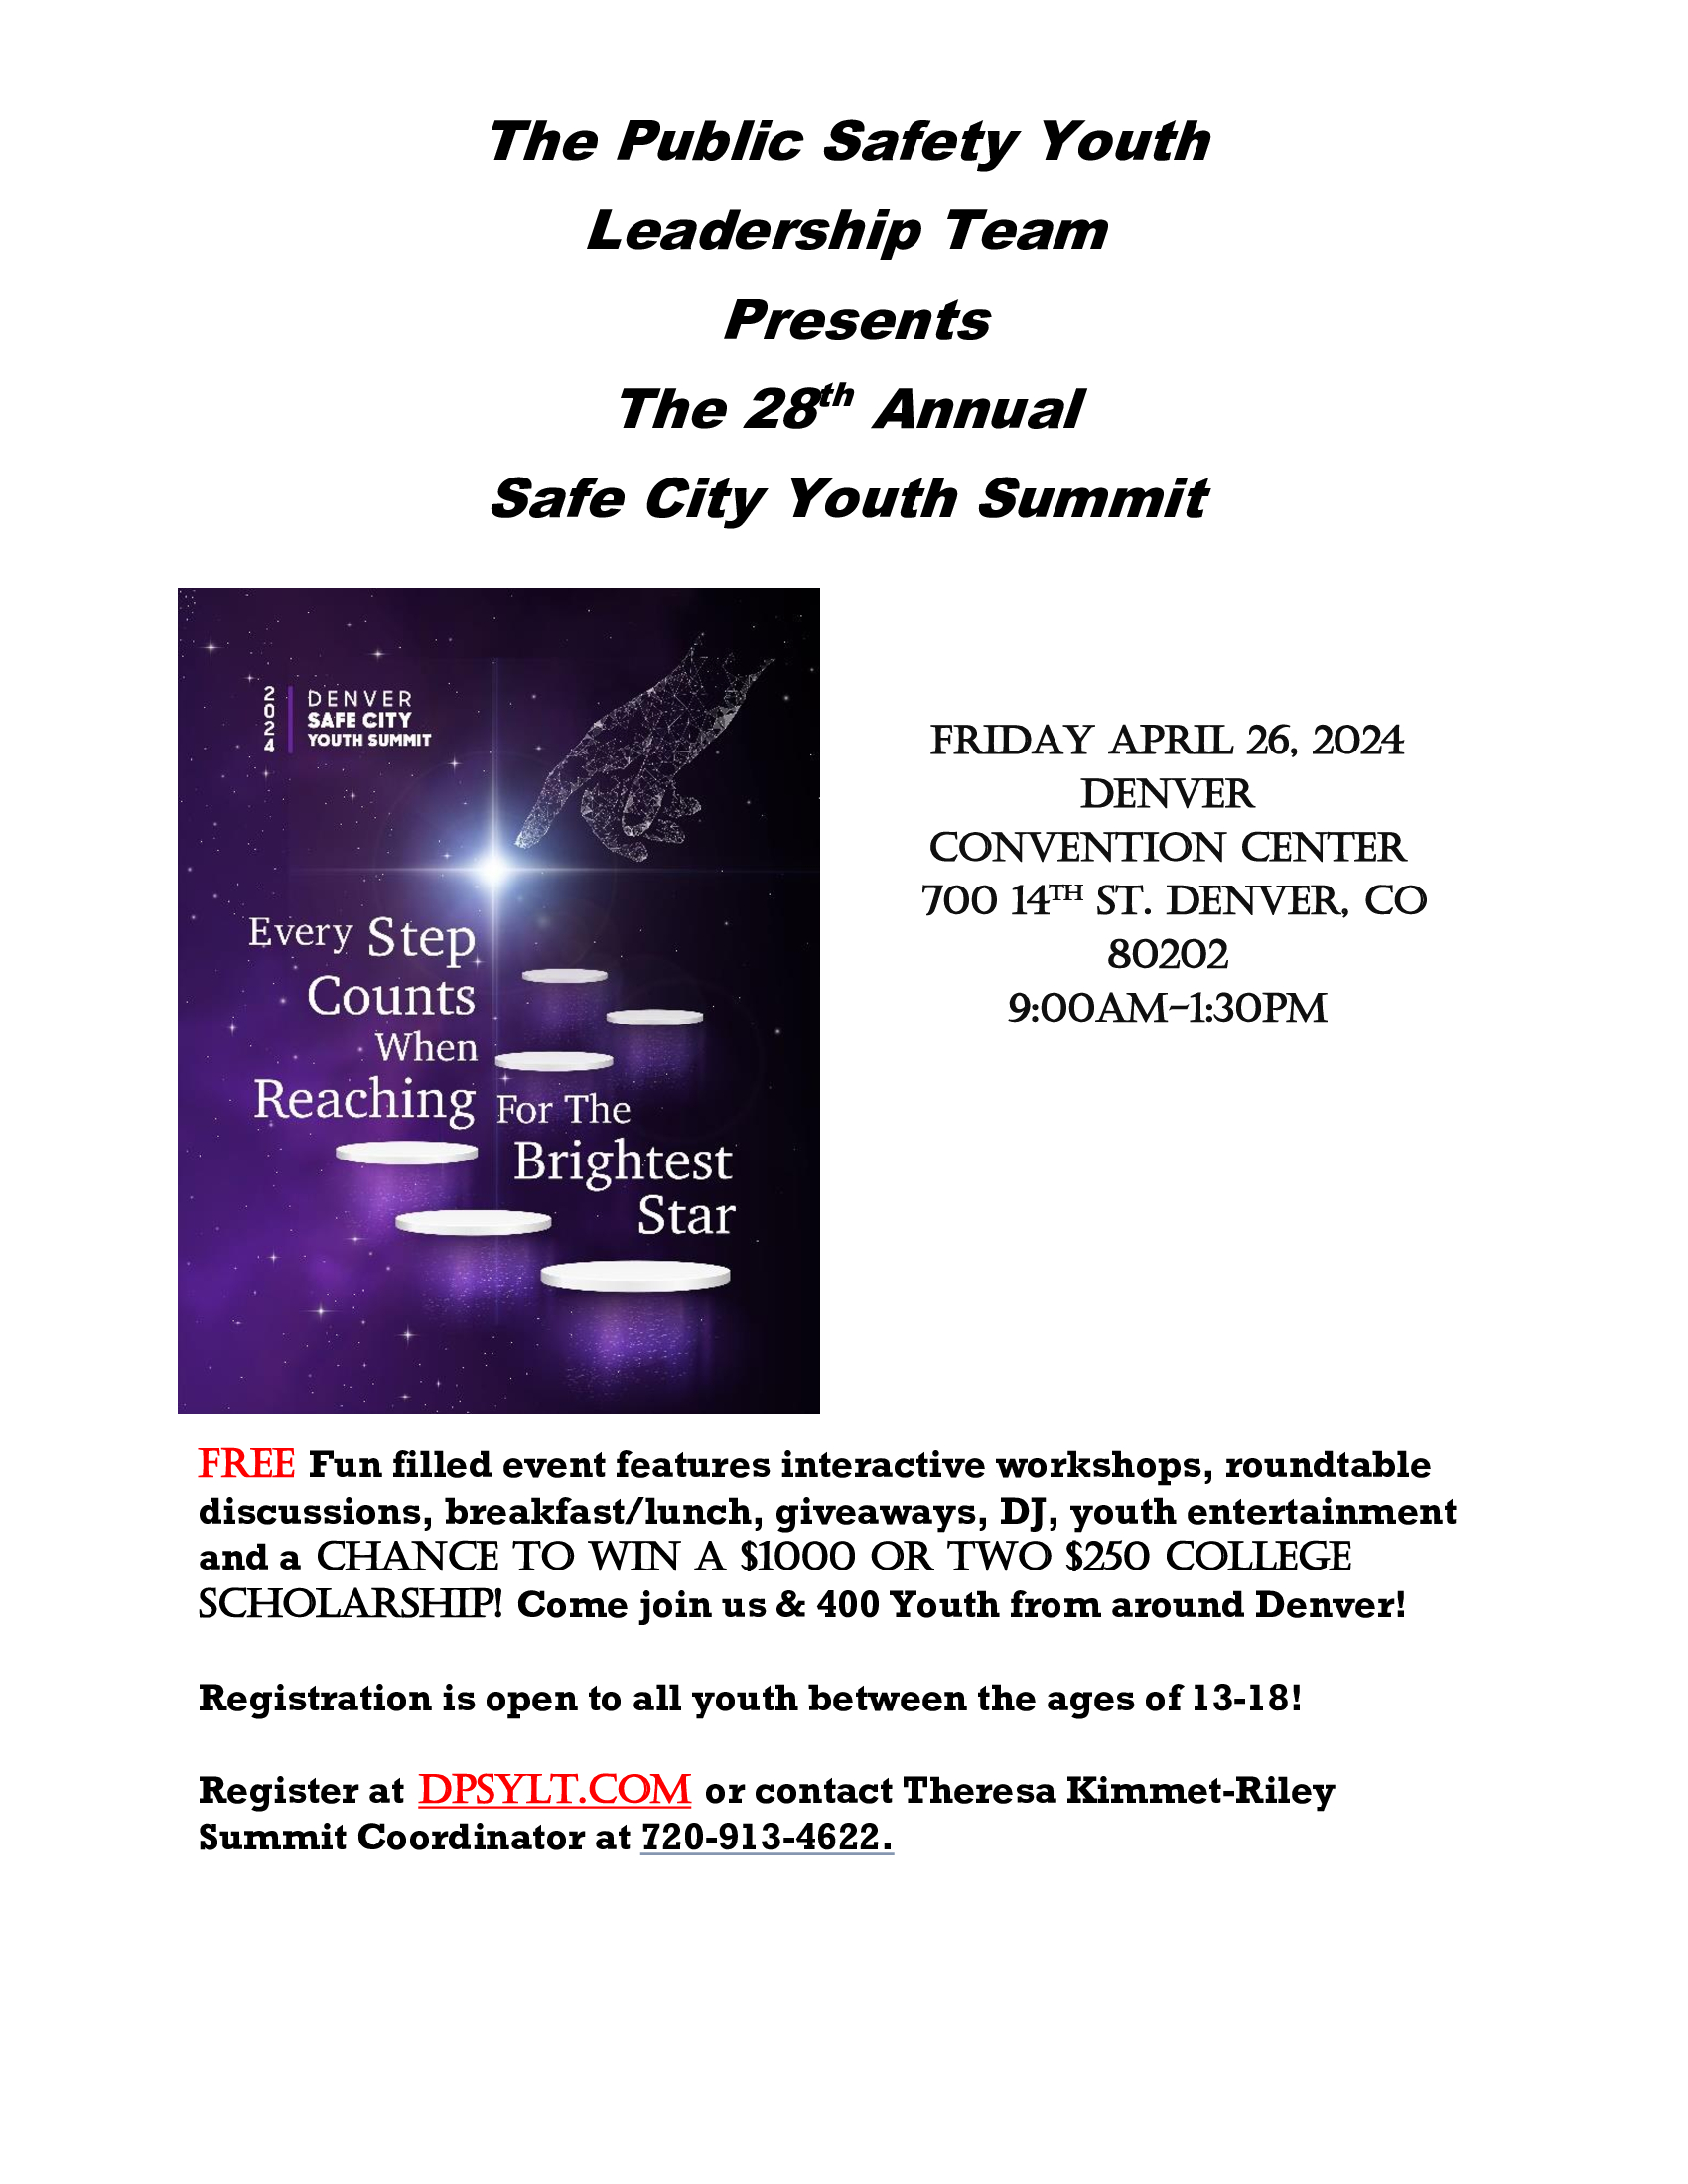 Safe City Youth Summit Flyer